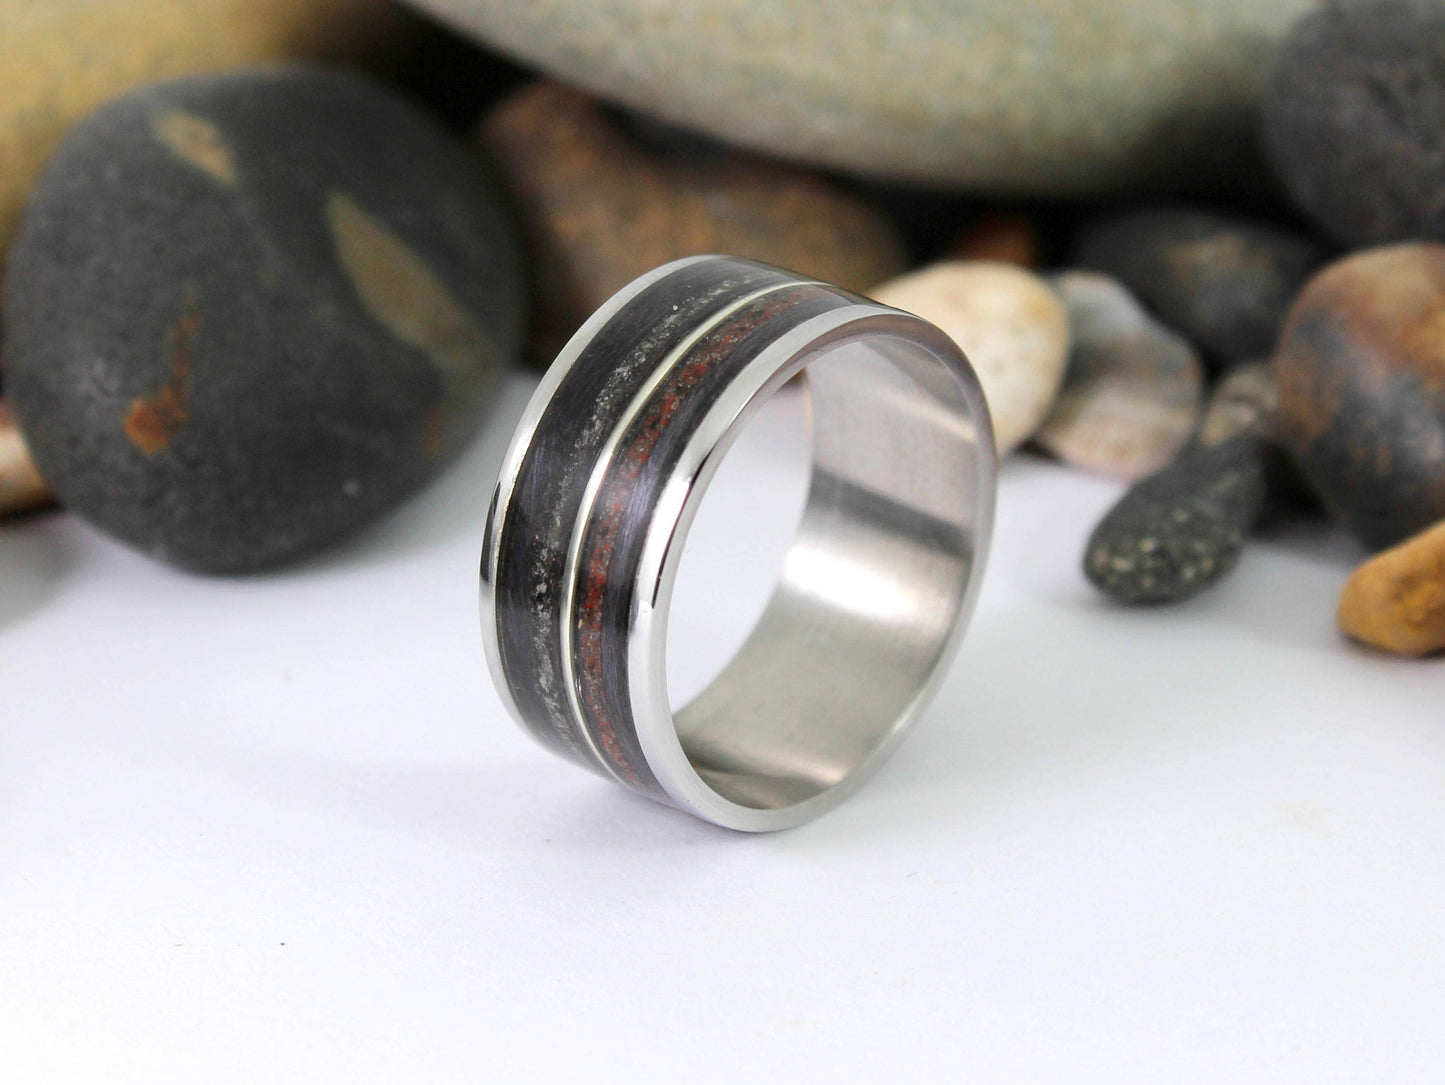 Steel Ring with Dinosaur Bone, Meteorite and a Silver Inlay